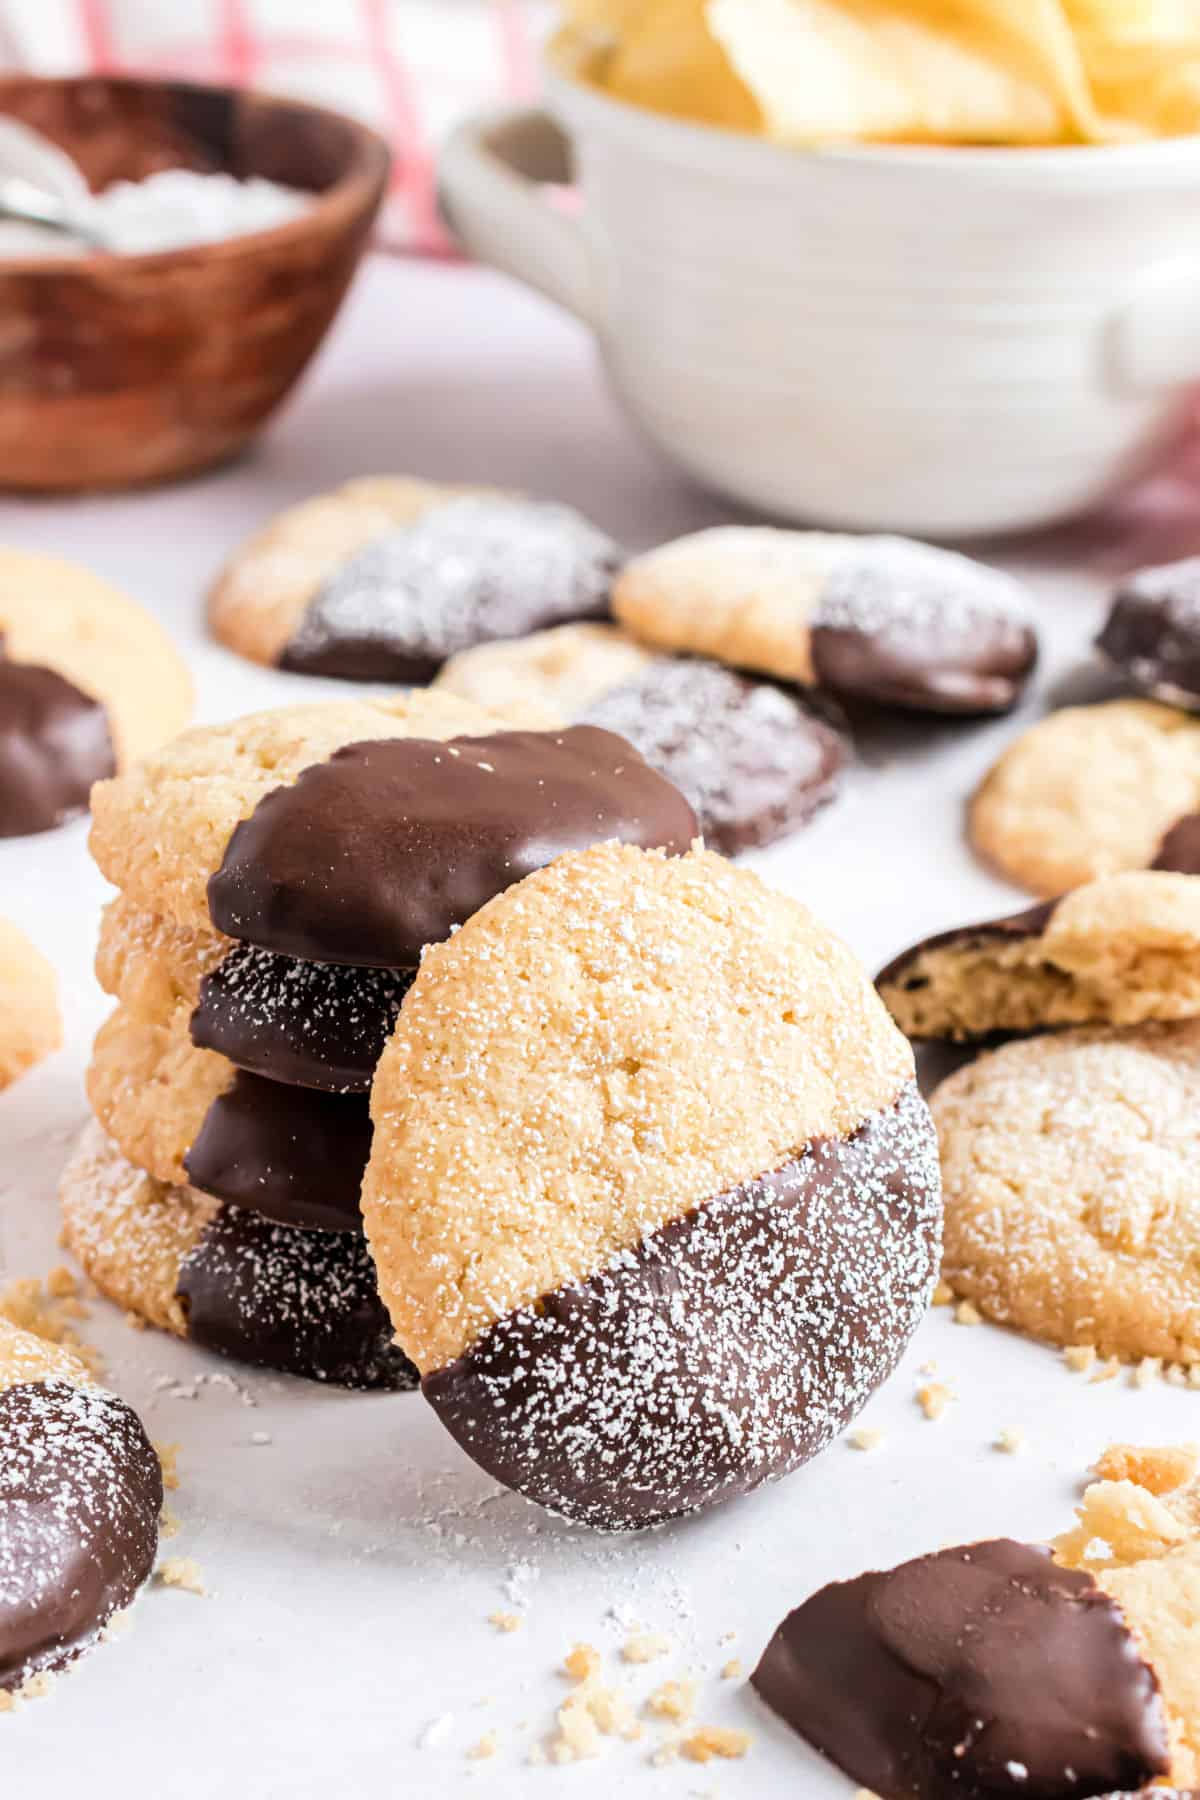 Potato chip cookies dipped in chocolate.